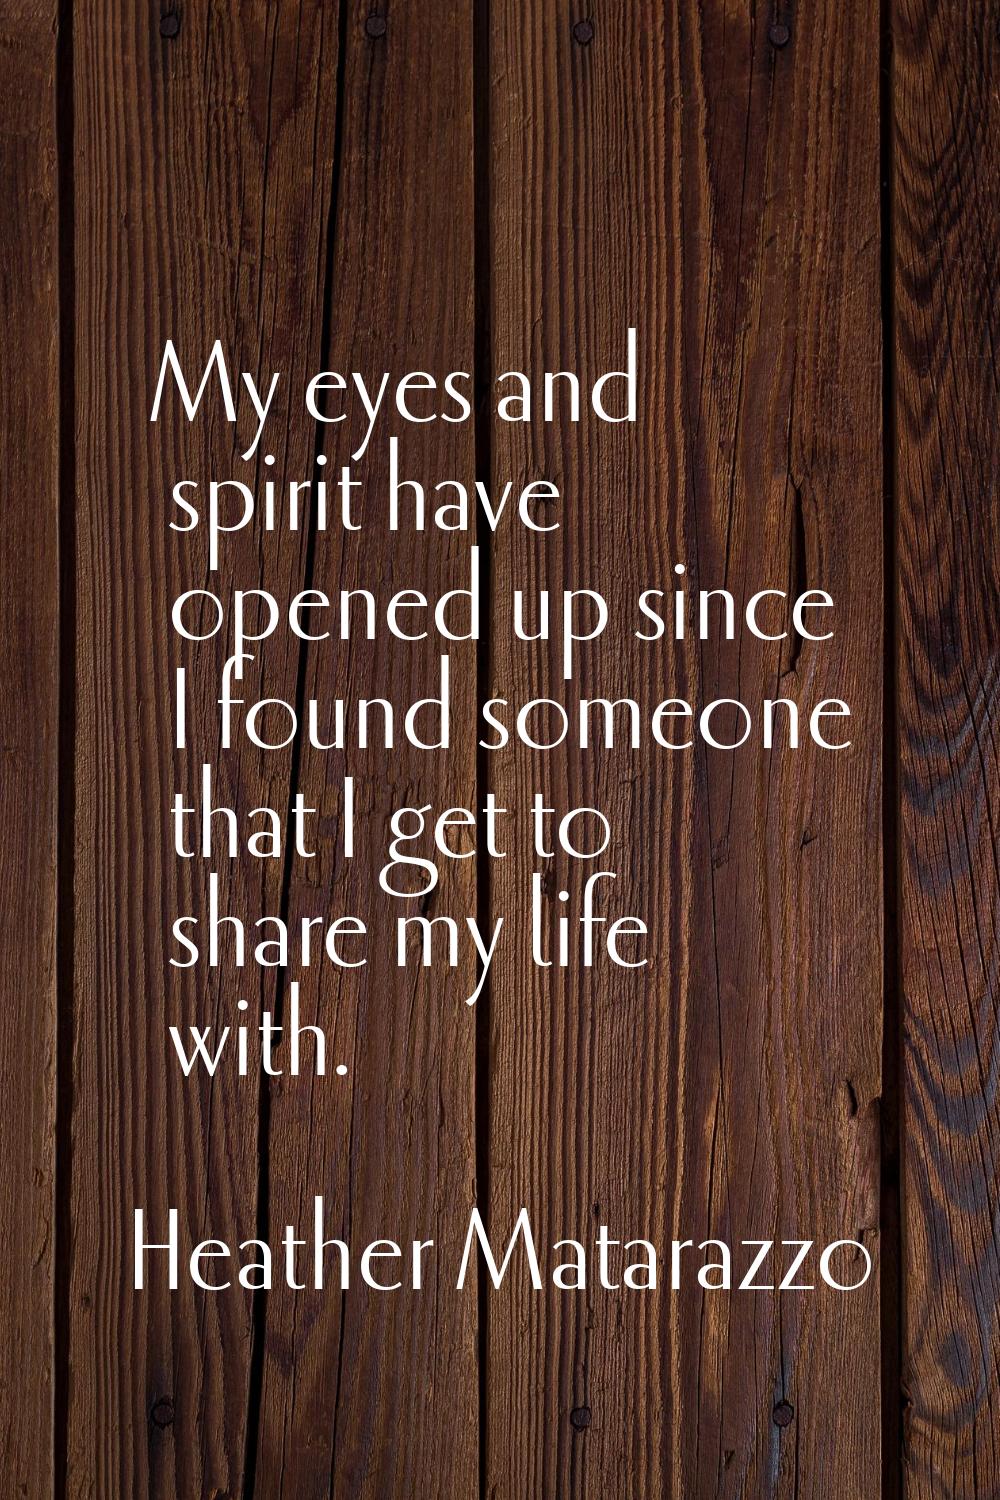 My eyes and spirit have opened up since I found someone that I get to share my life with.